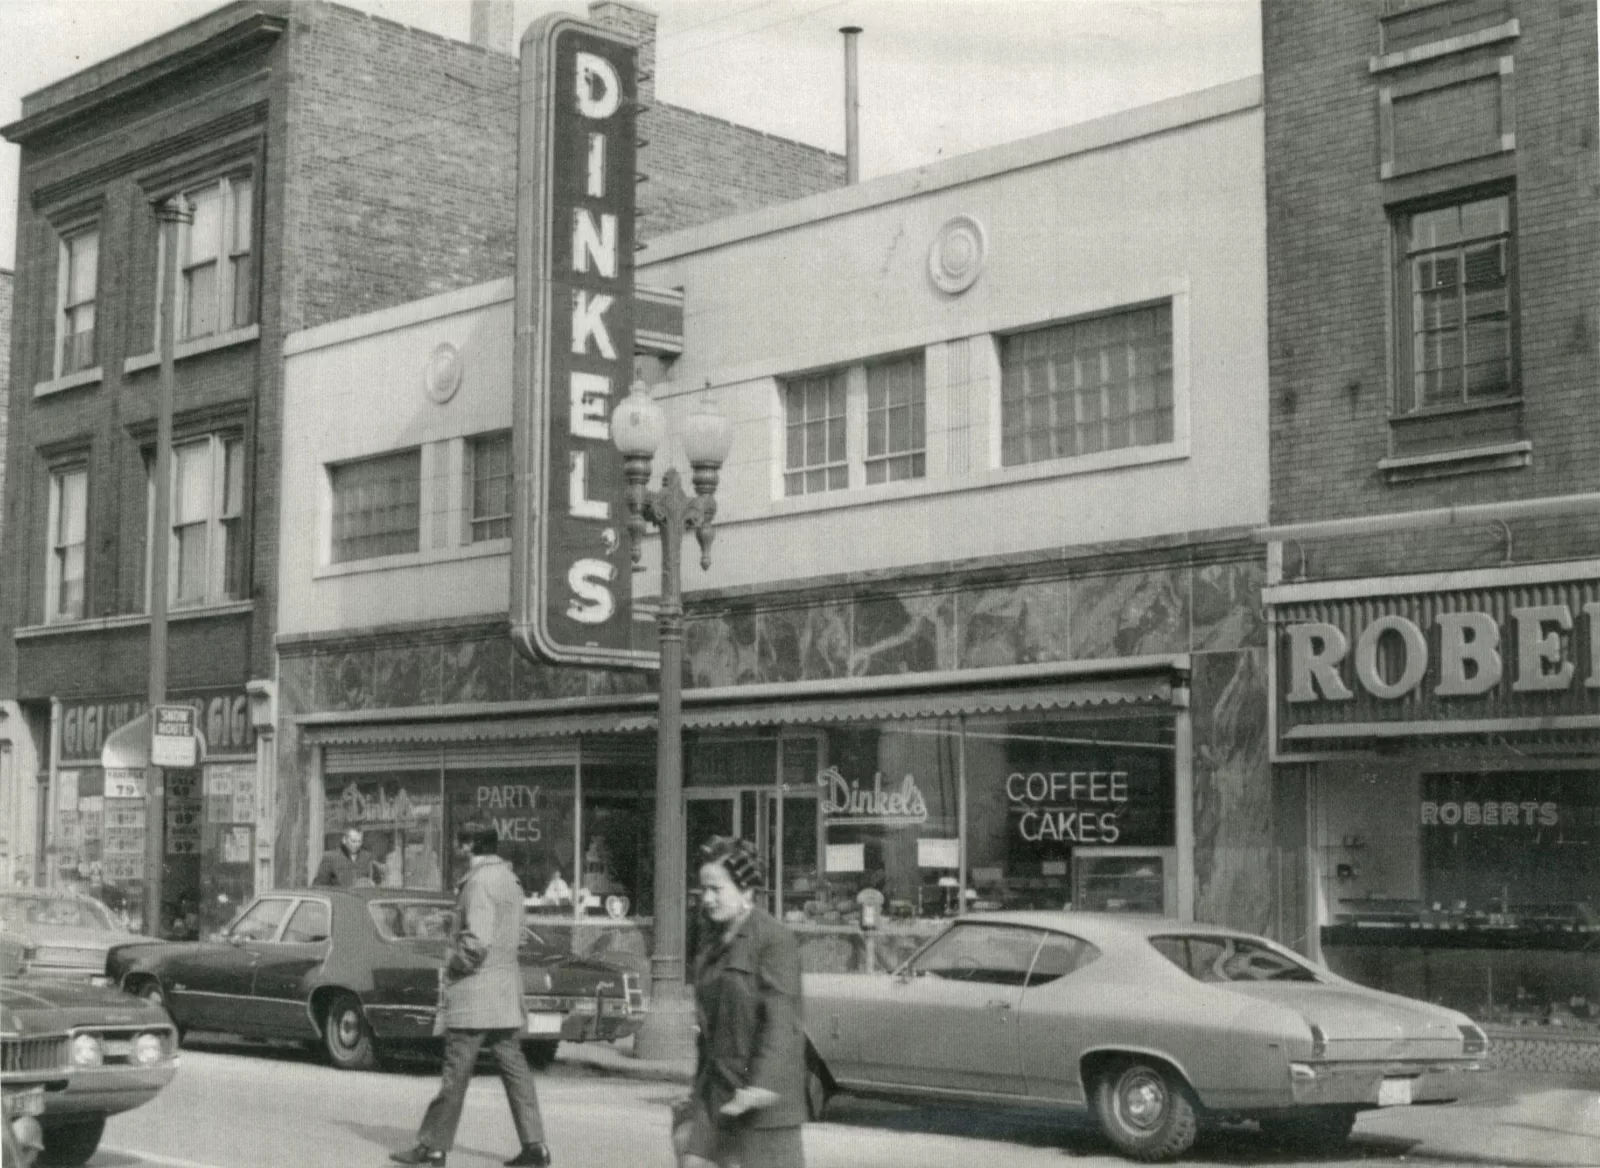 Dinkel’s Bakery storefront at 3329 North Lincoln Avenue, undated